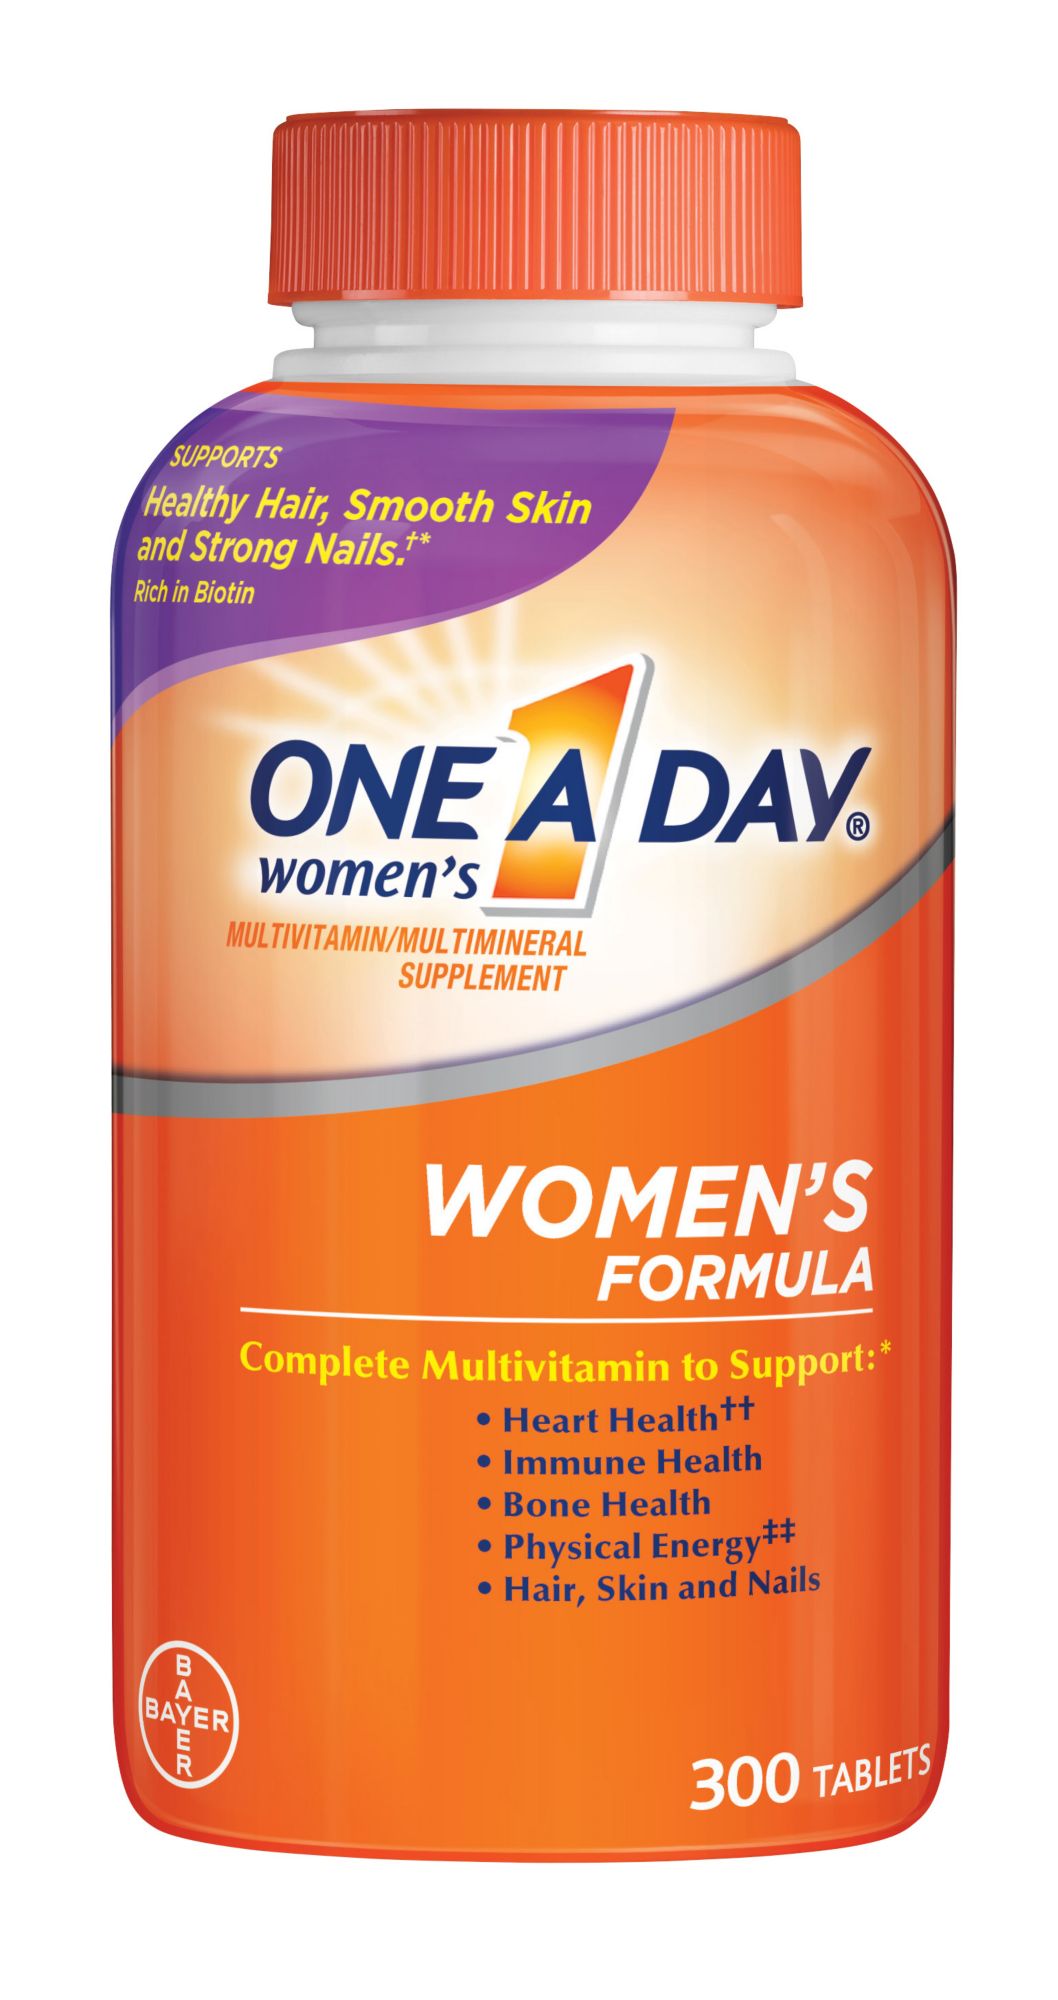 One A Day Women's Multivitamin Tablets, 300 ct.